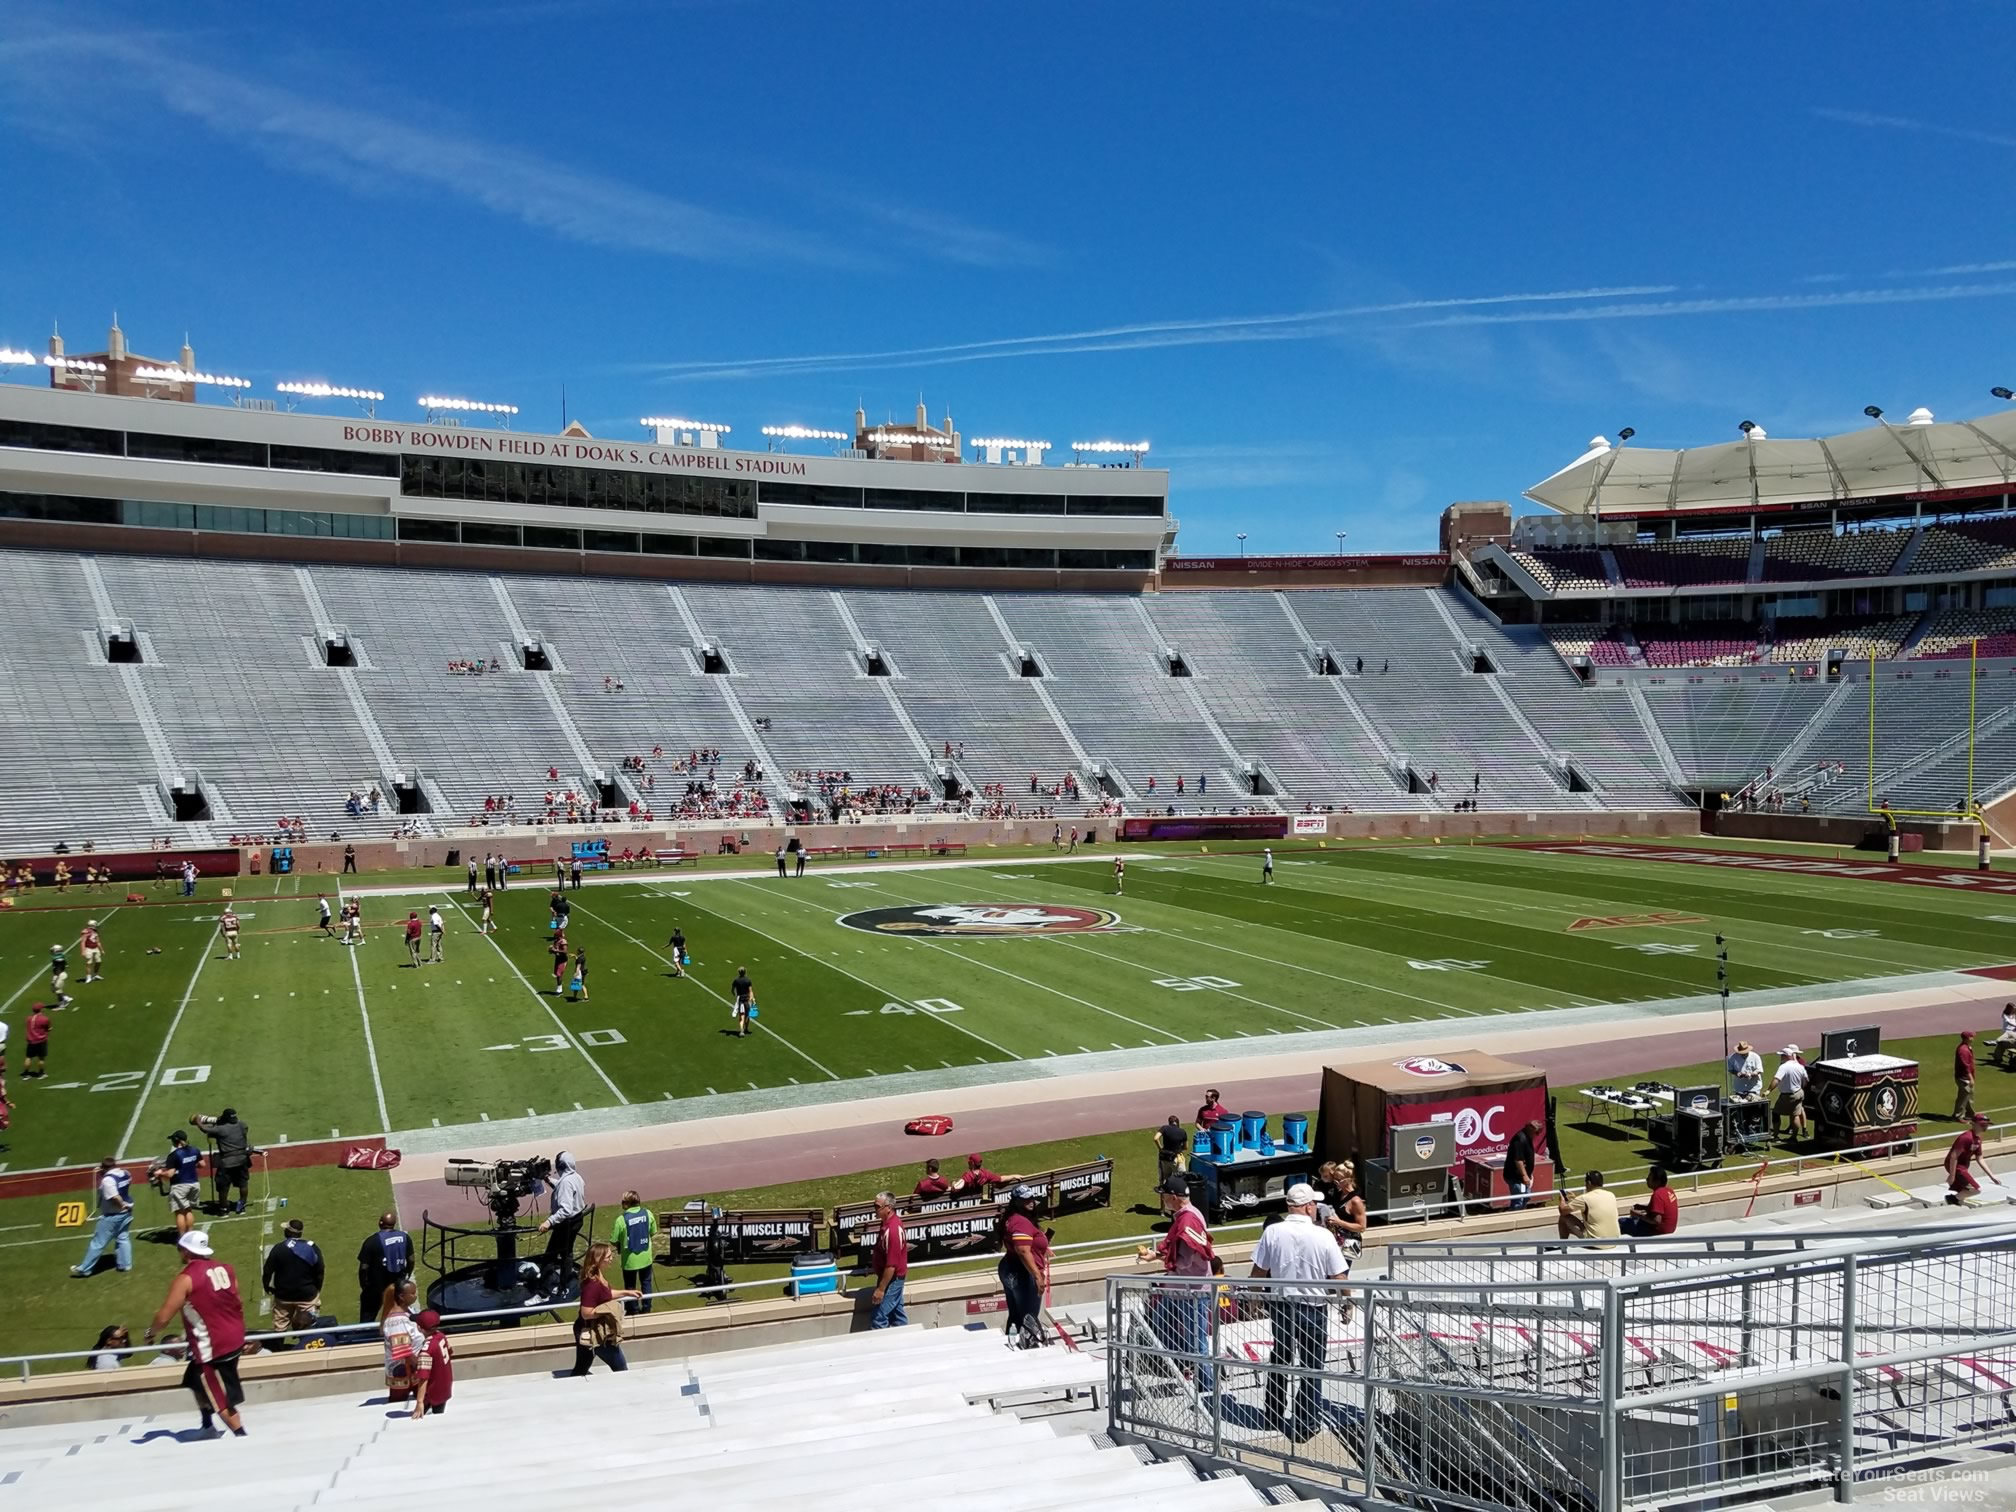 section 35, row 25 seat view  - doak campbell stadium